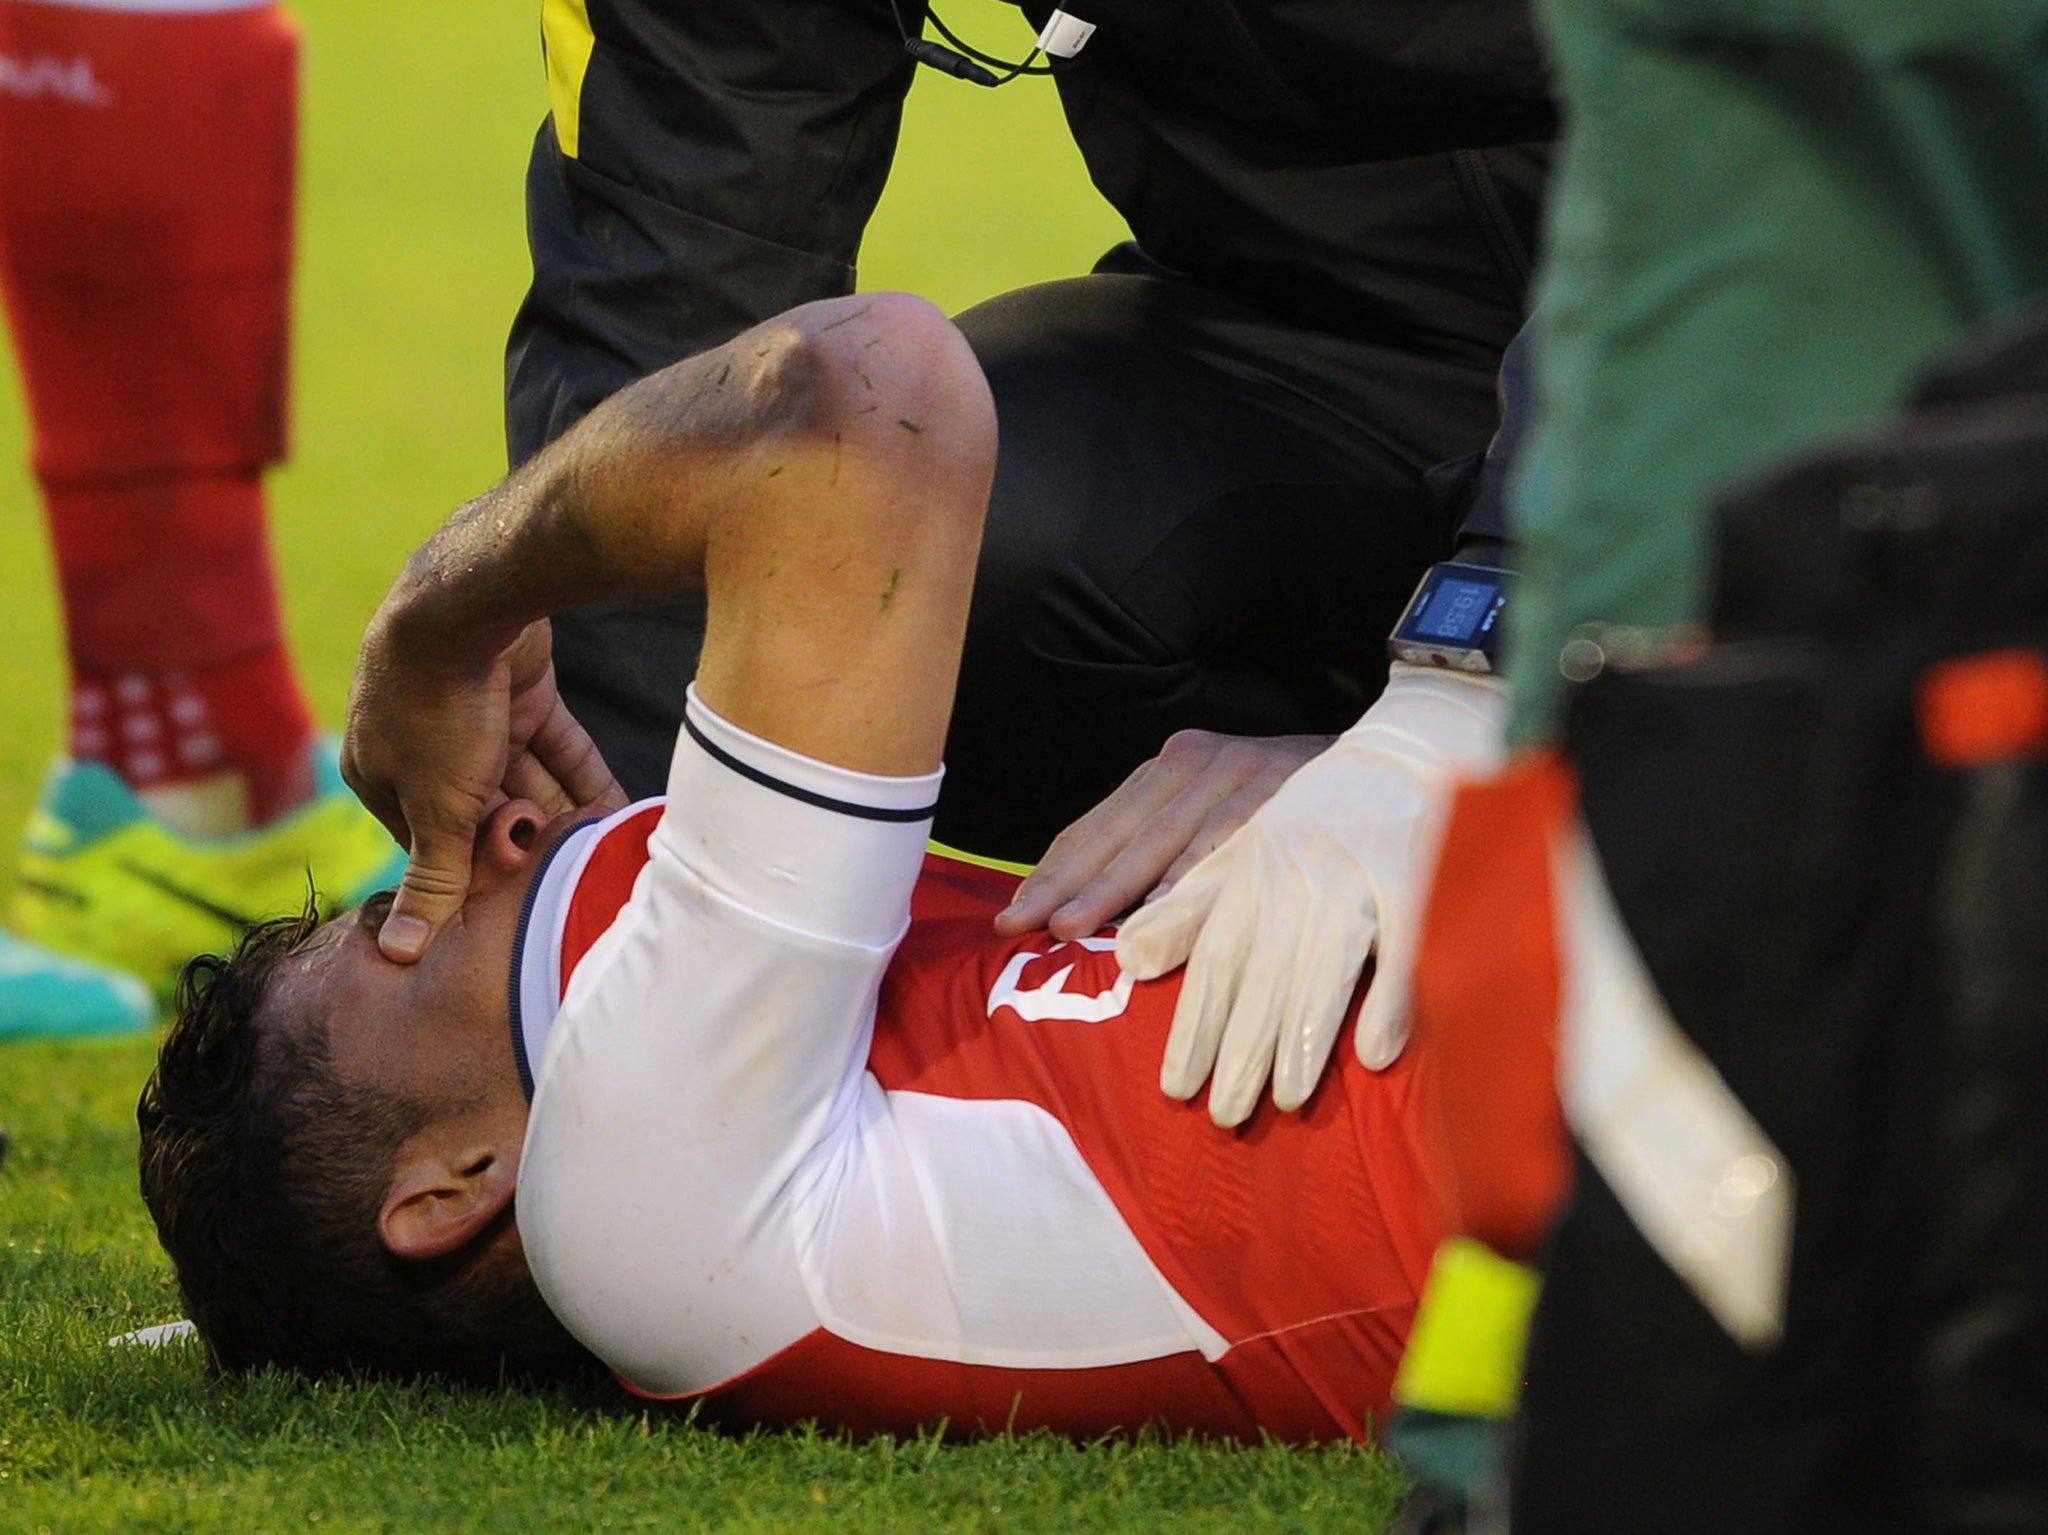 Gabriel was treated on the pitch by medical staff during Sunday's win